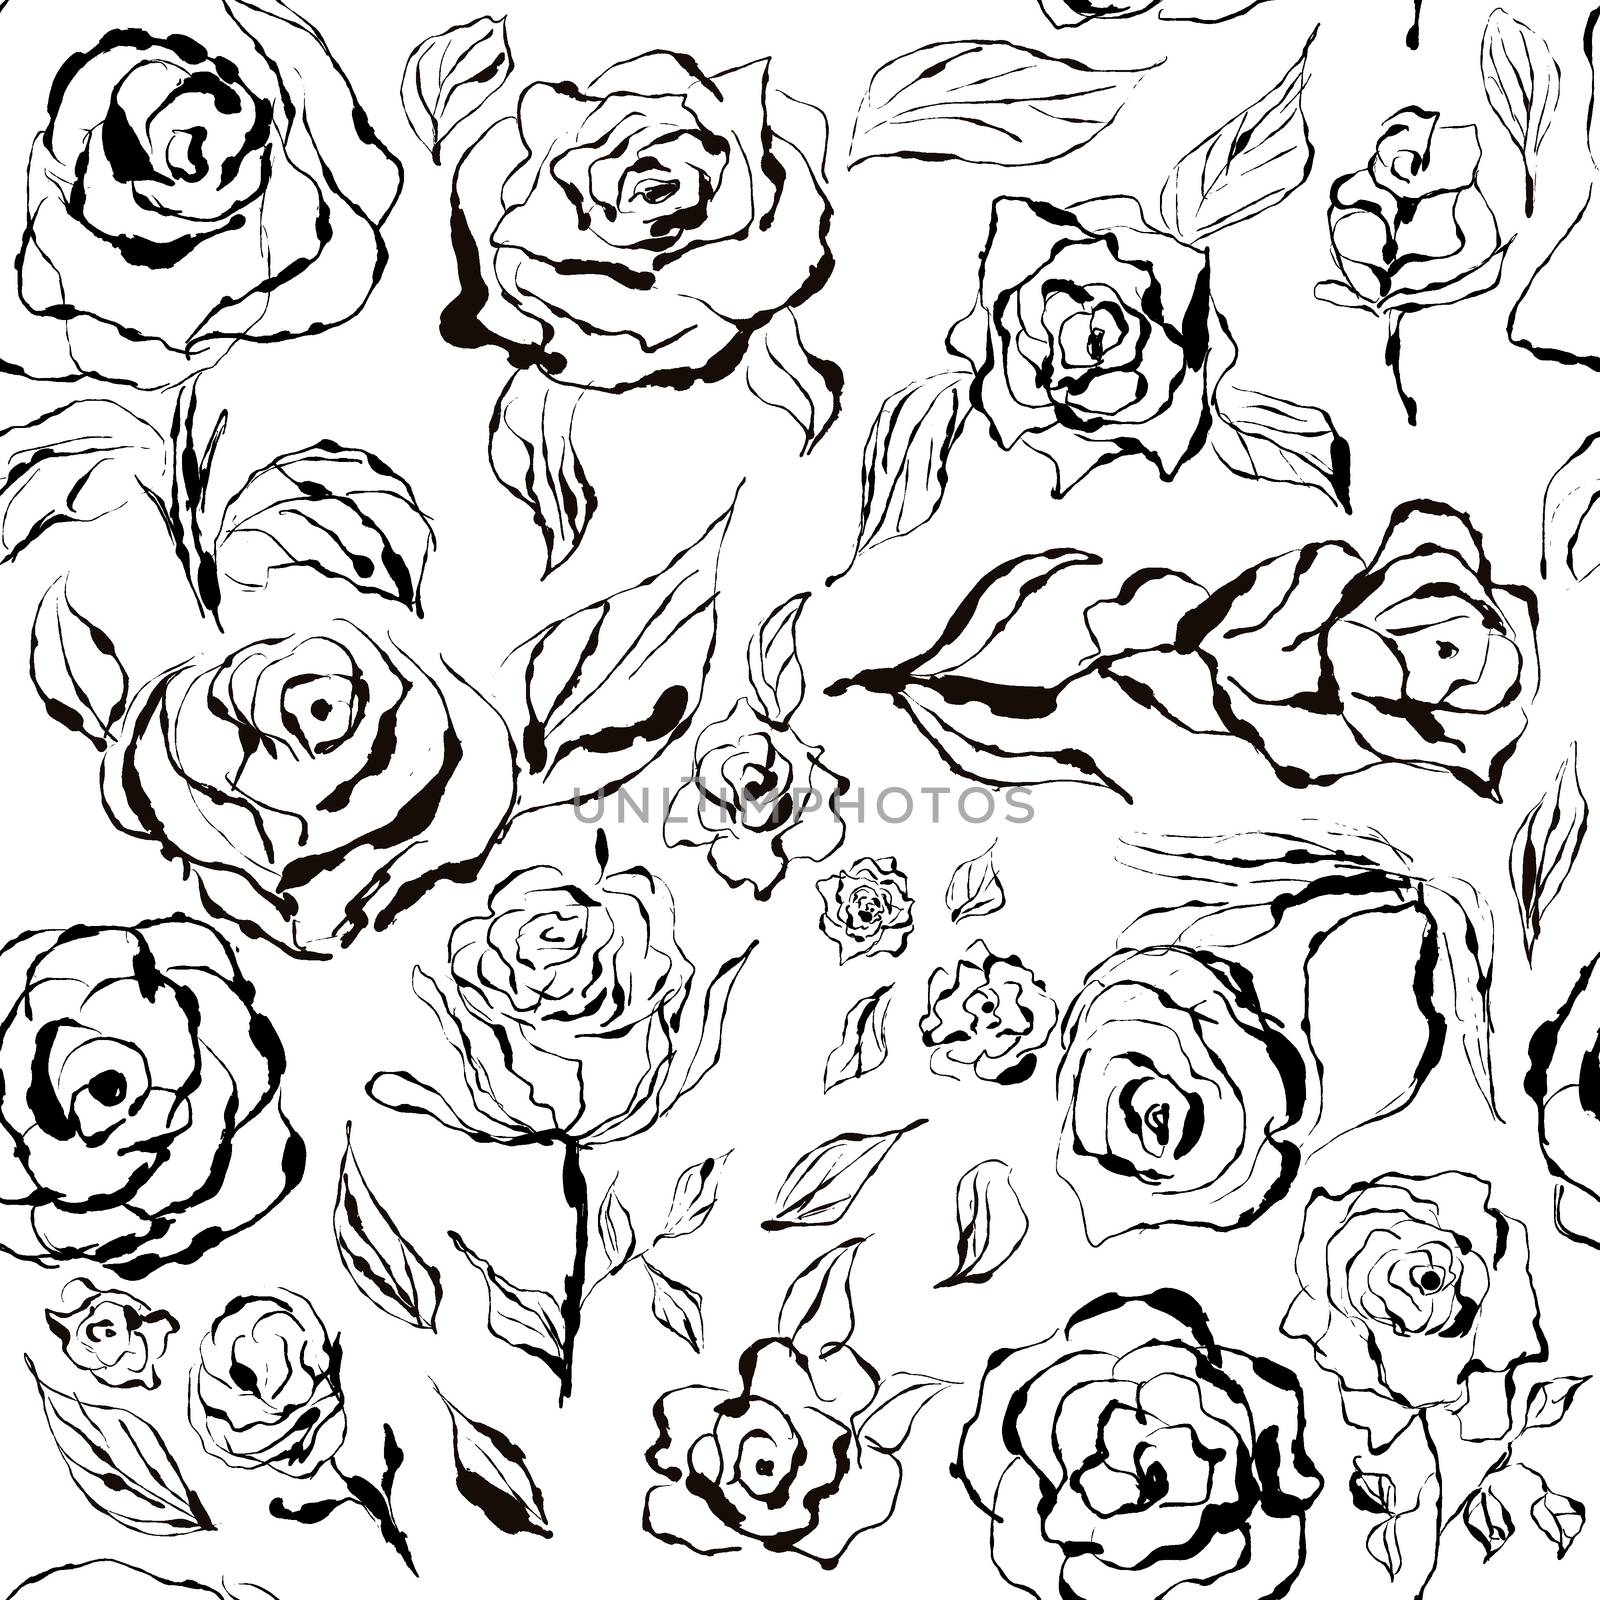 Black and white seamless pattern with black roses on white background. Hand drawn, ink texture pattern. Endless pattern for scrapbooking, cards, wedding invitations, Valentine Day, mother day.